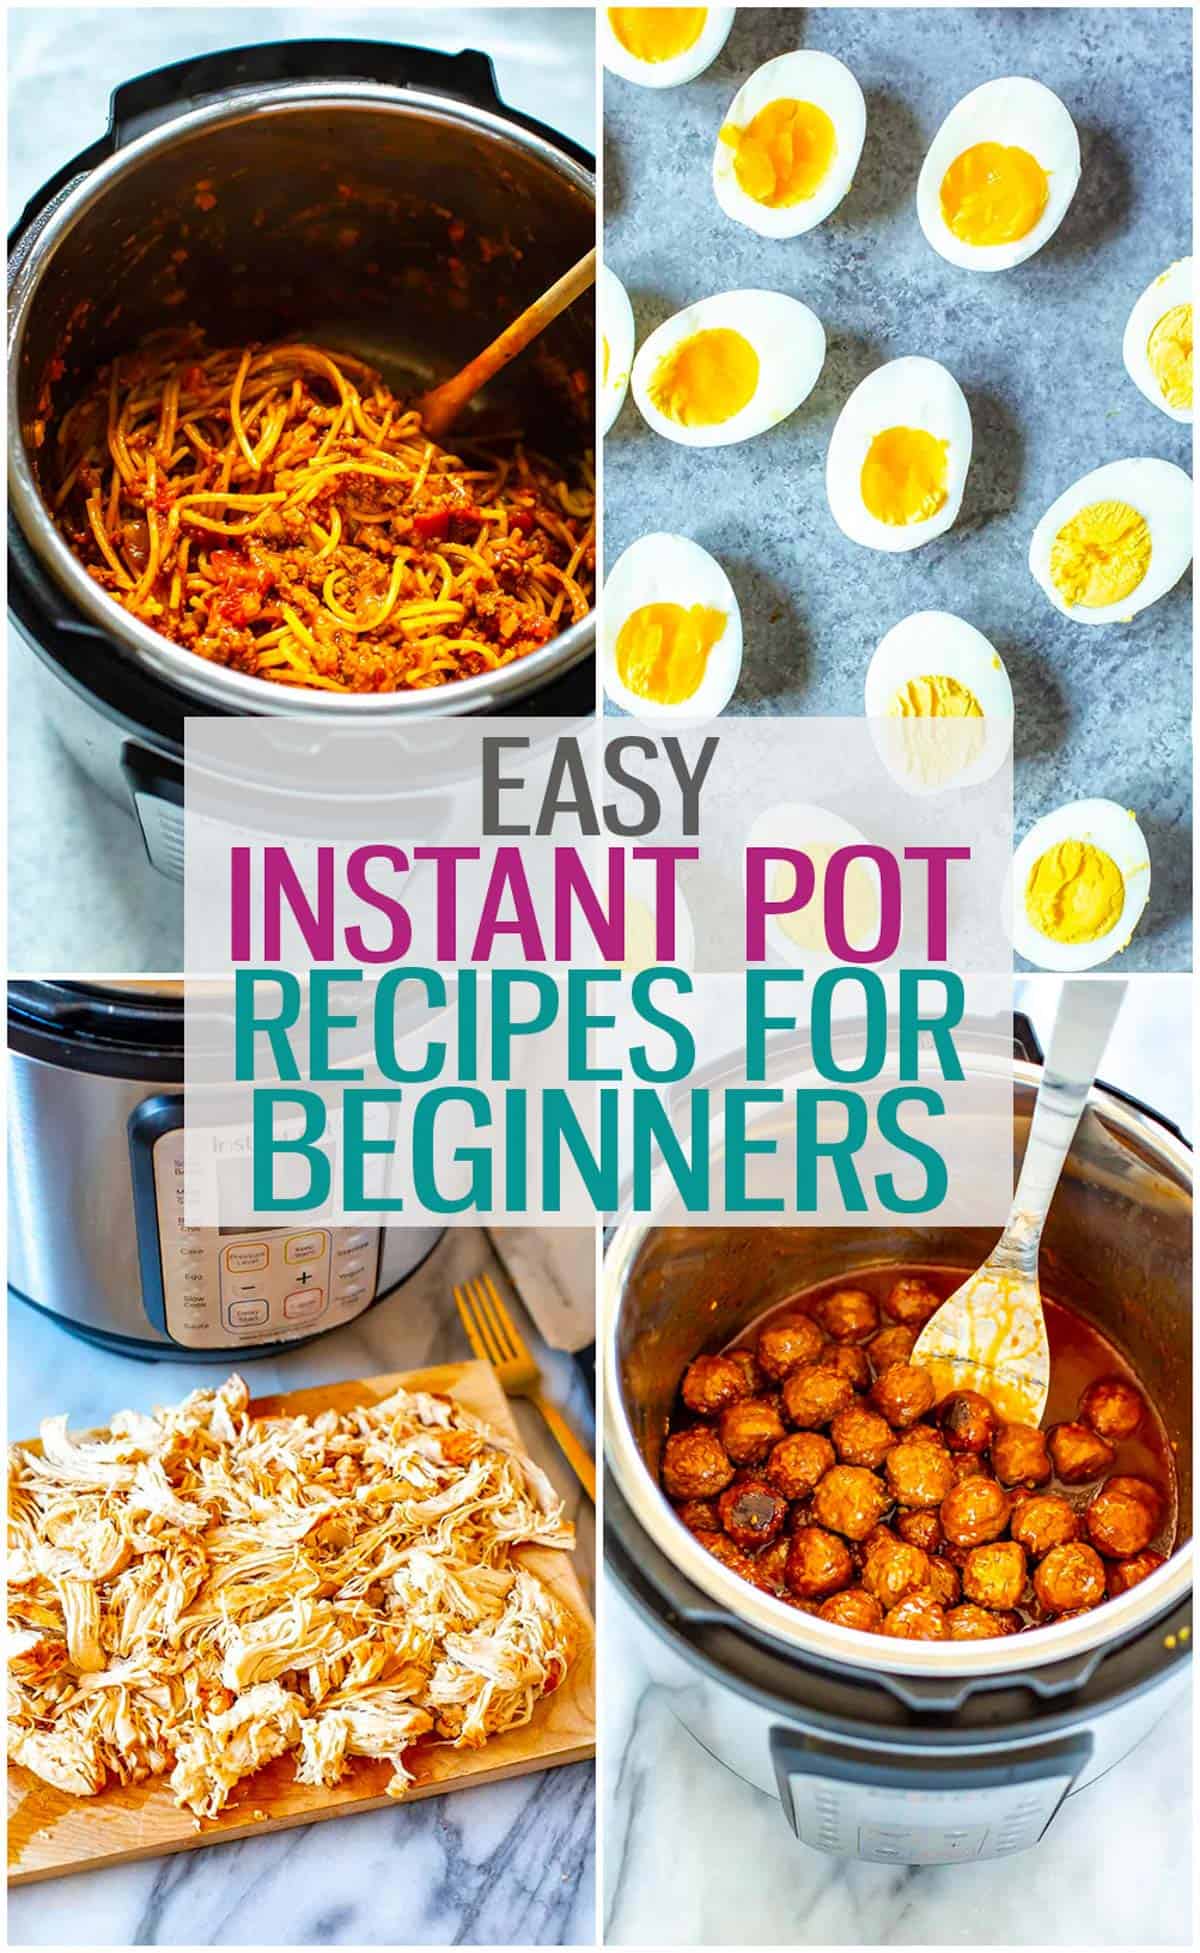 A collage of four different Instant Pot recipes with the text "Easy Instant Pot Recipes for Beginners" layered over top.